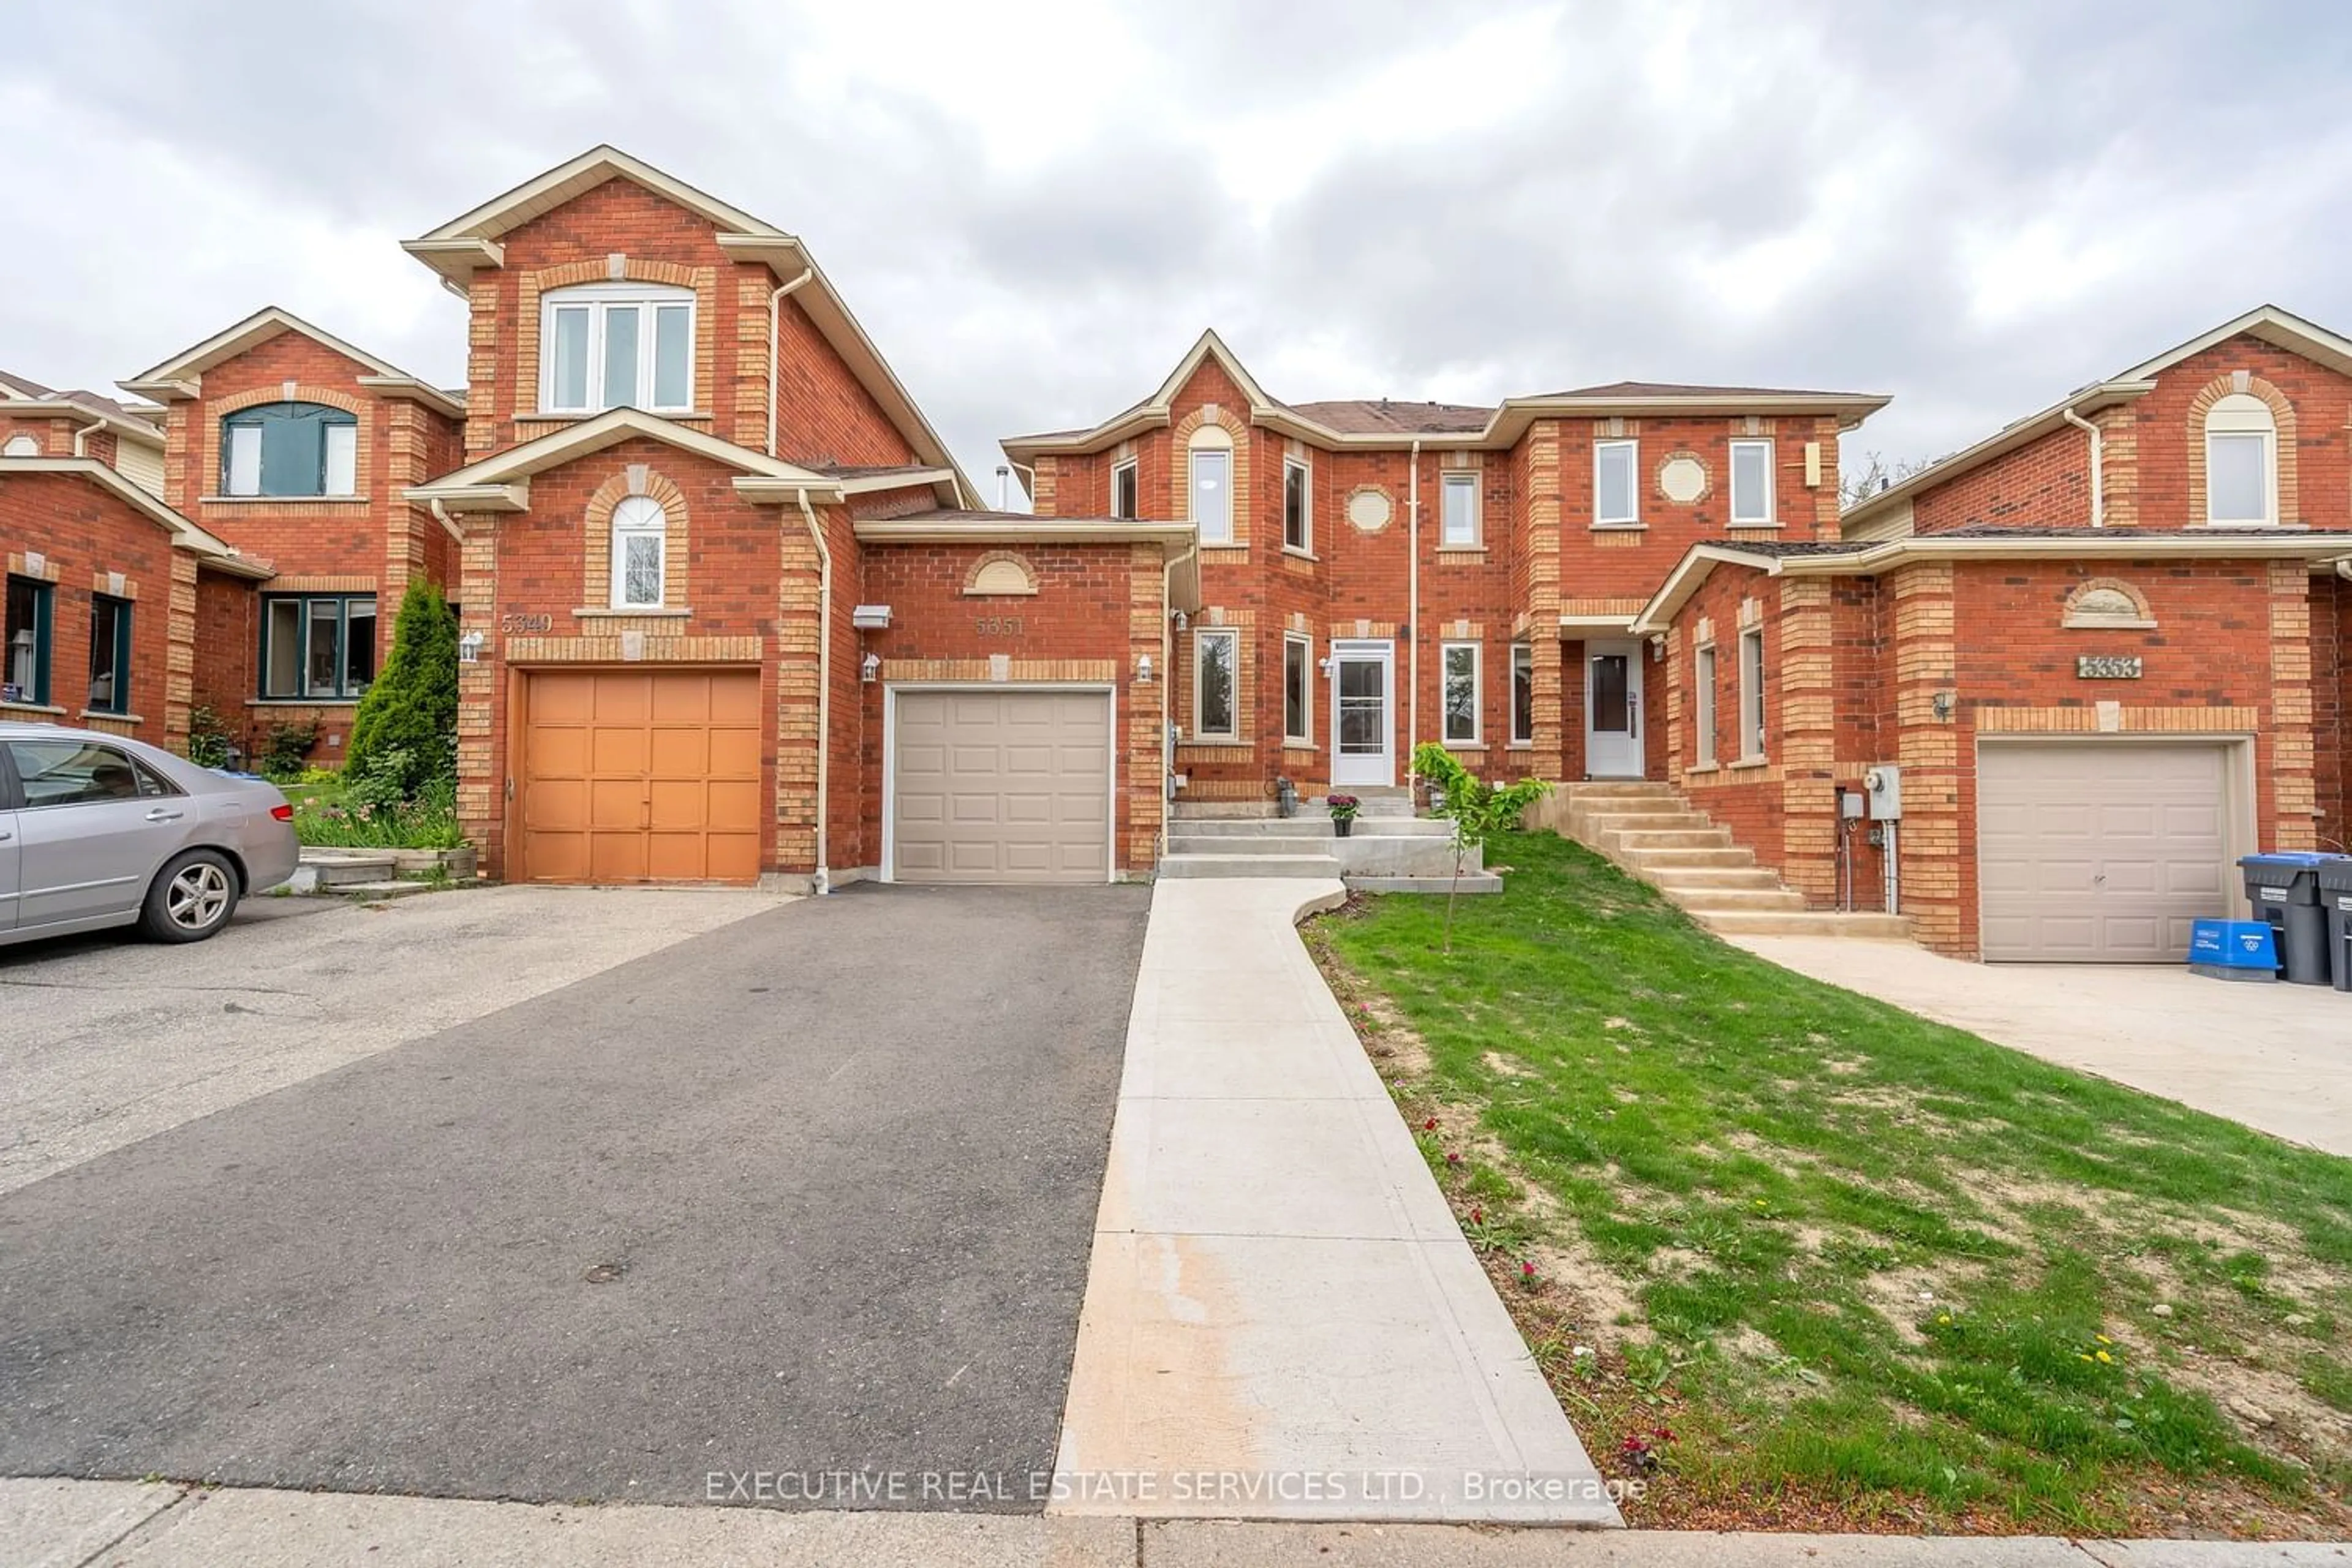 Home with brick exterior material for 5351 Richborough Dr, Mississauga Ontario L5R 3K1